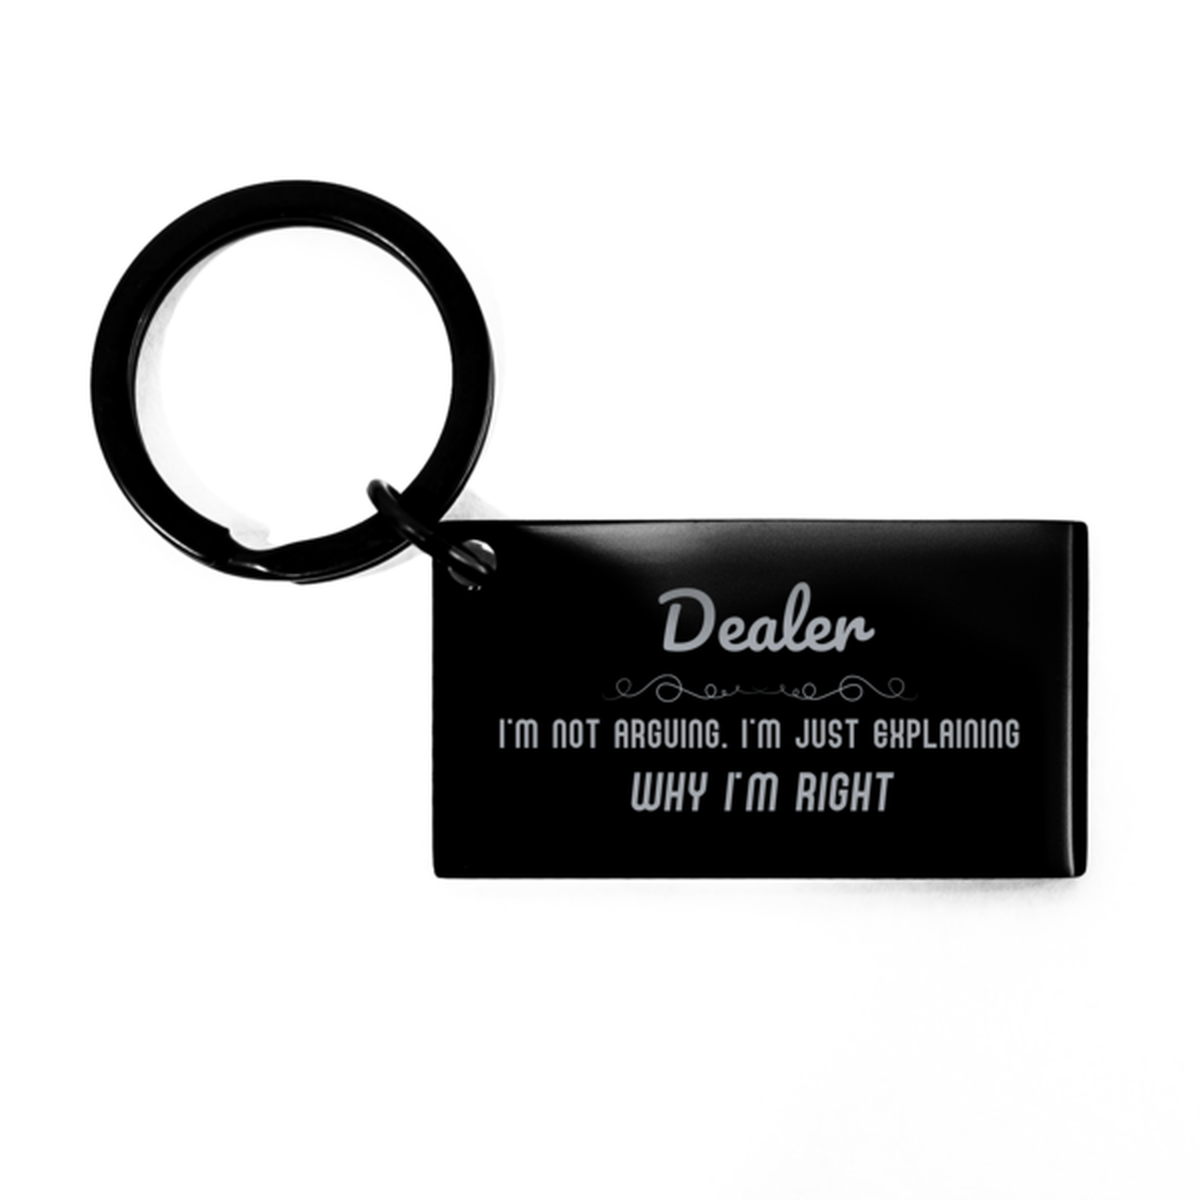 Dealer I'm not Arguing. I'm Just Explaining Why I'm RIGHT Keychain, Funny Saying Quote Dealer Gifts For Dealer Graduation Birthday Christmas Gifts for Men Women Coworker